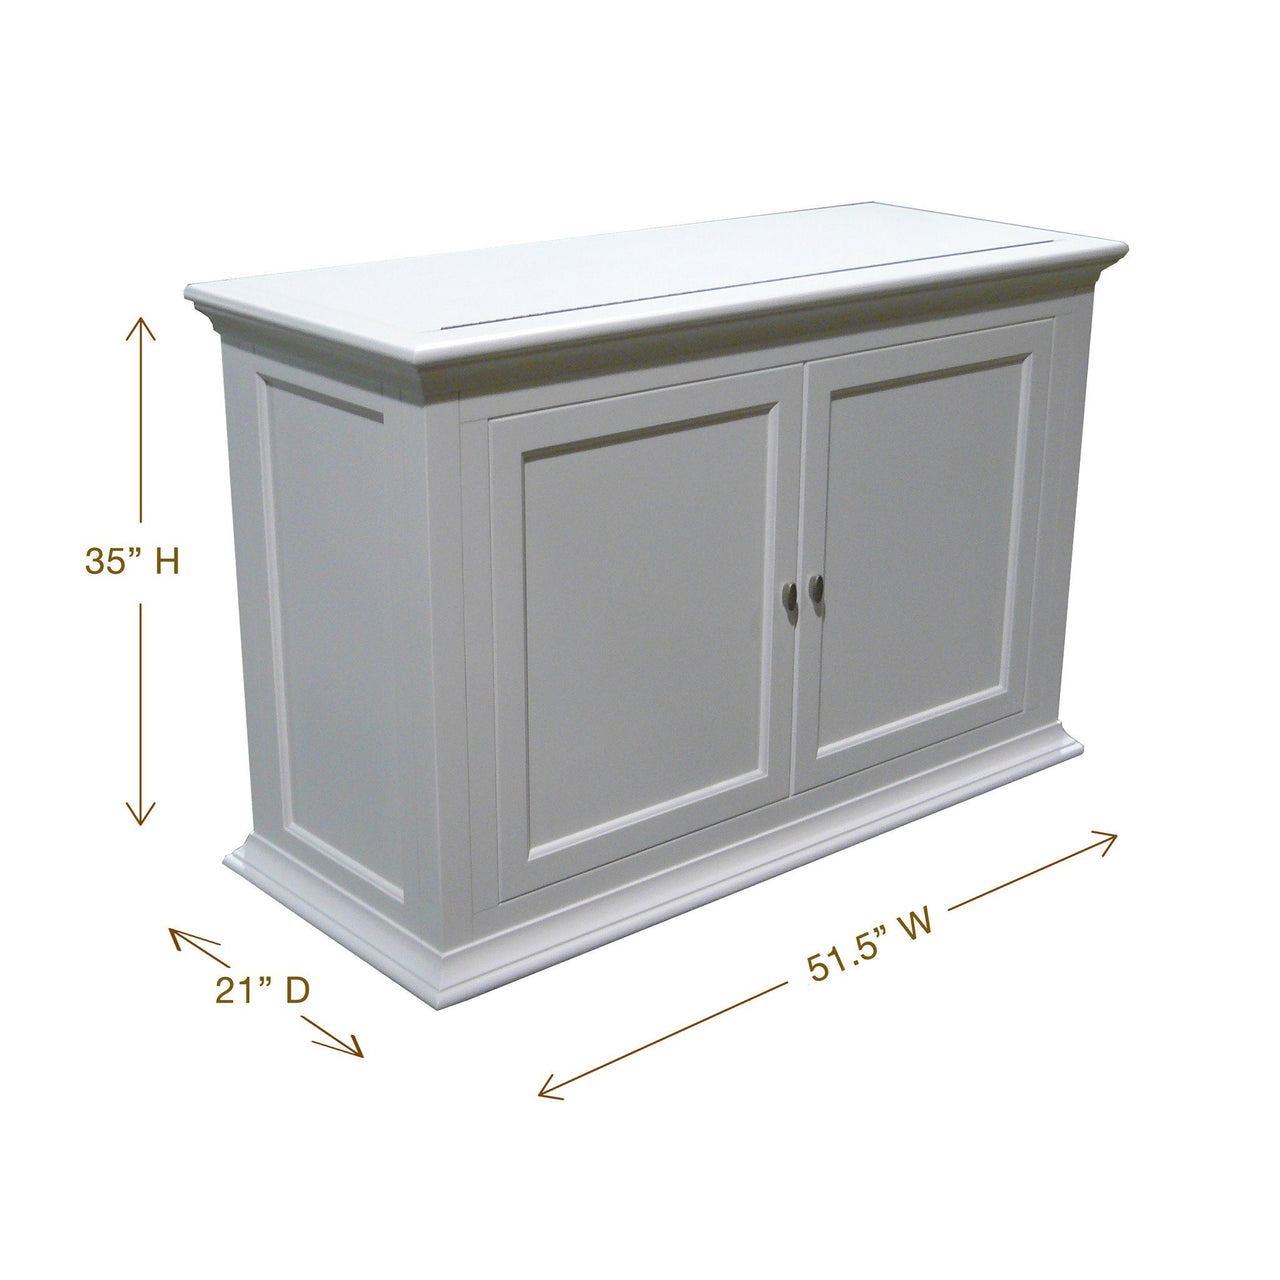 Touchstone Seaford Tv Lift Cabinets For Up To 46” Flat Screen Tv’S Tv Lift Cabinets Touchstone 